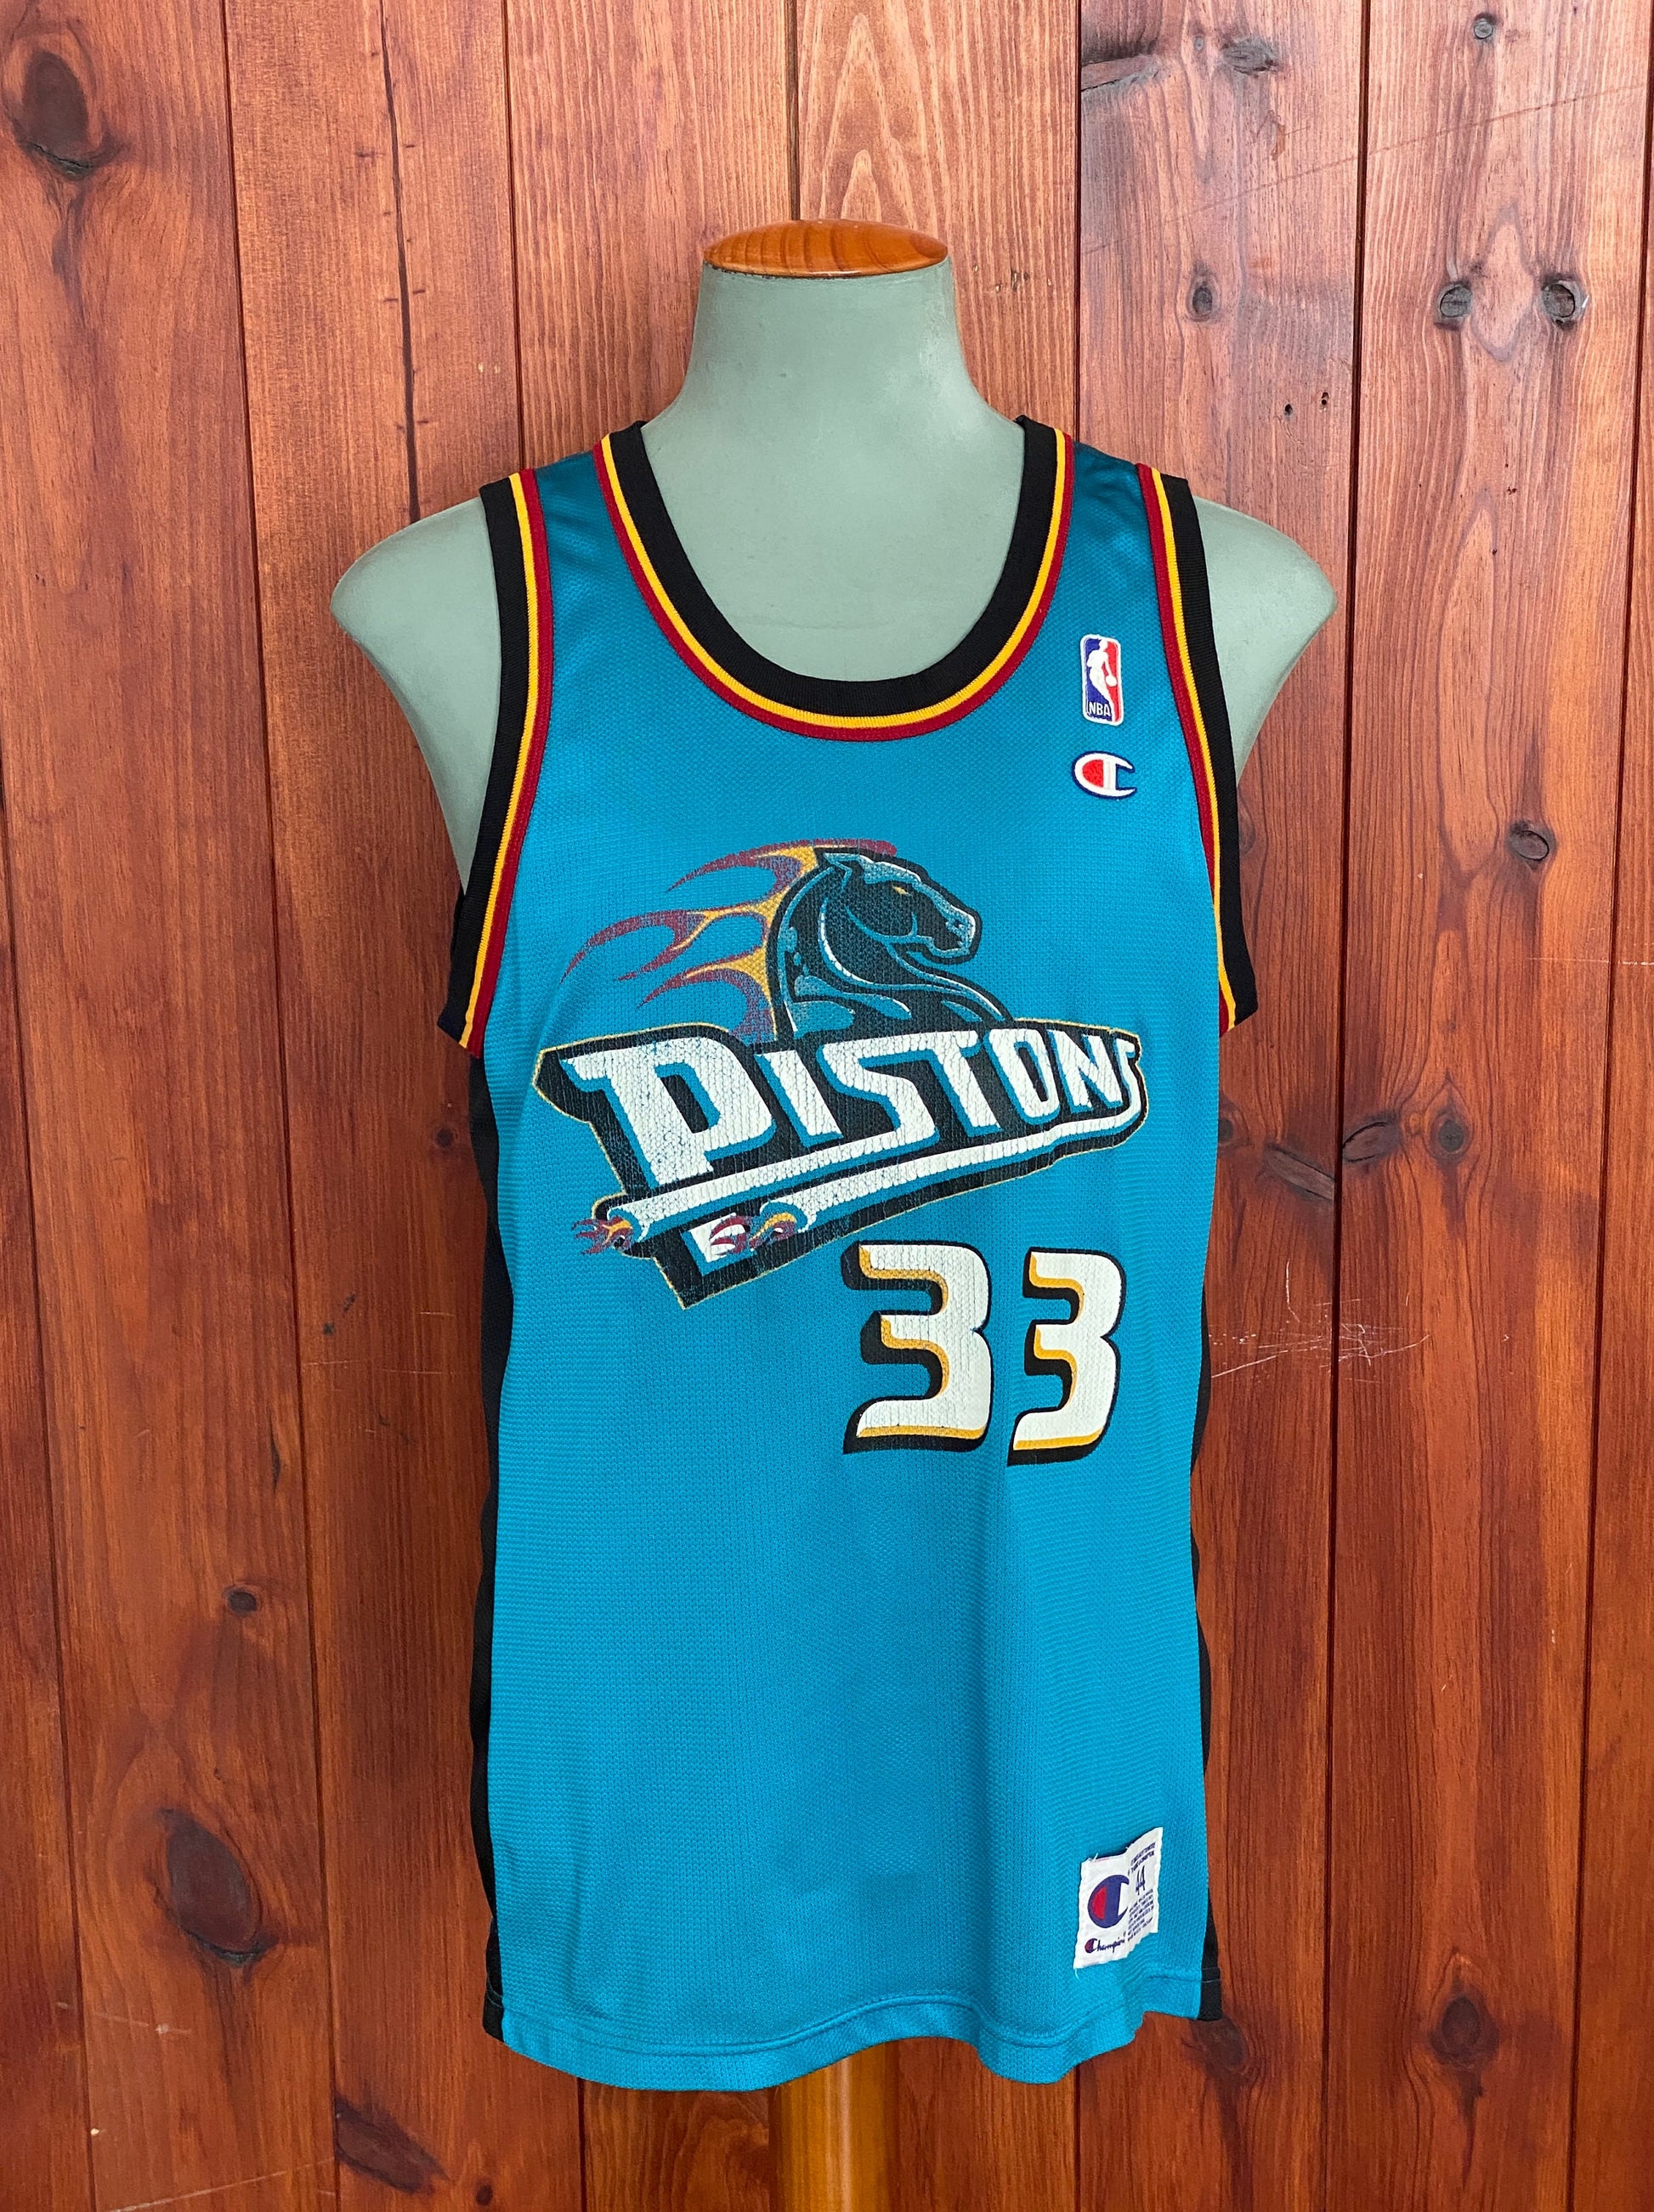 Vintage 90s NBA Champion Detroit Pistons Hill #33 jersey, size 44 - front view. Made in USA by Champion.